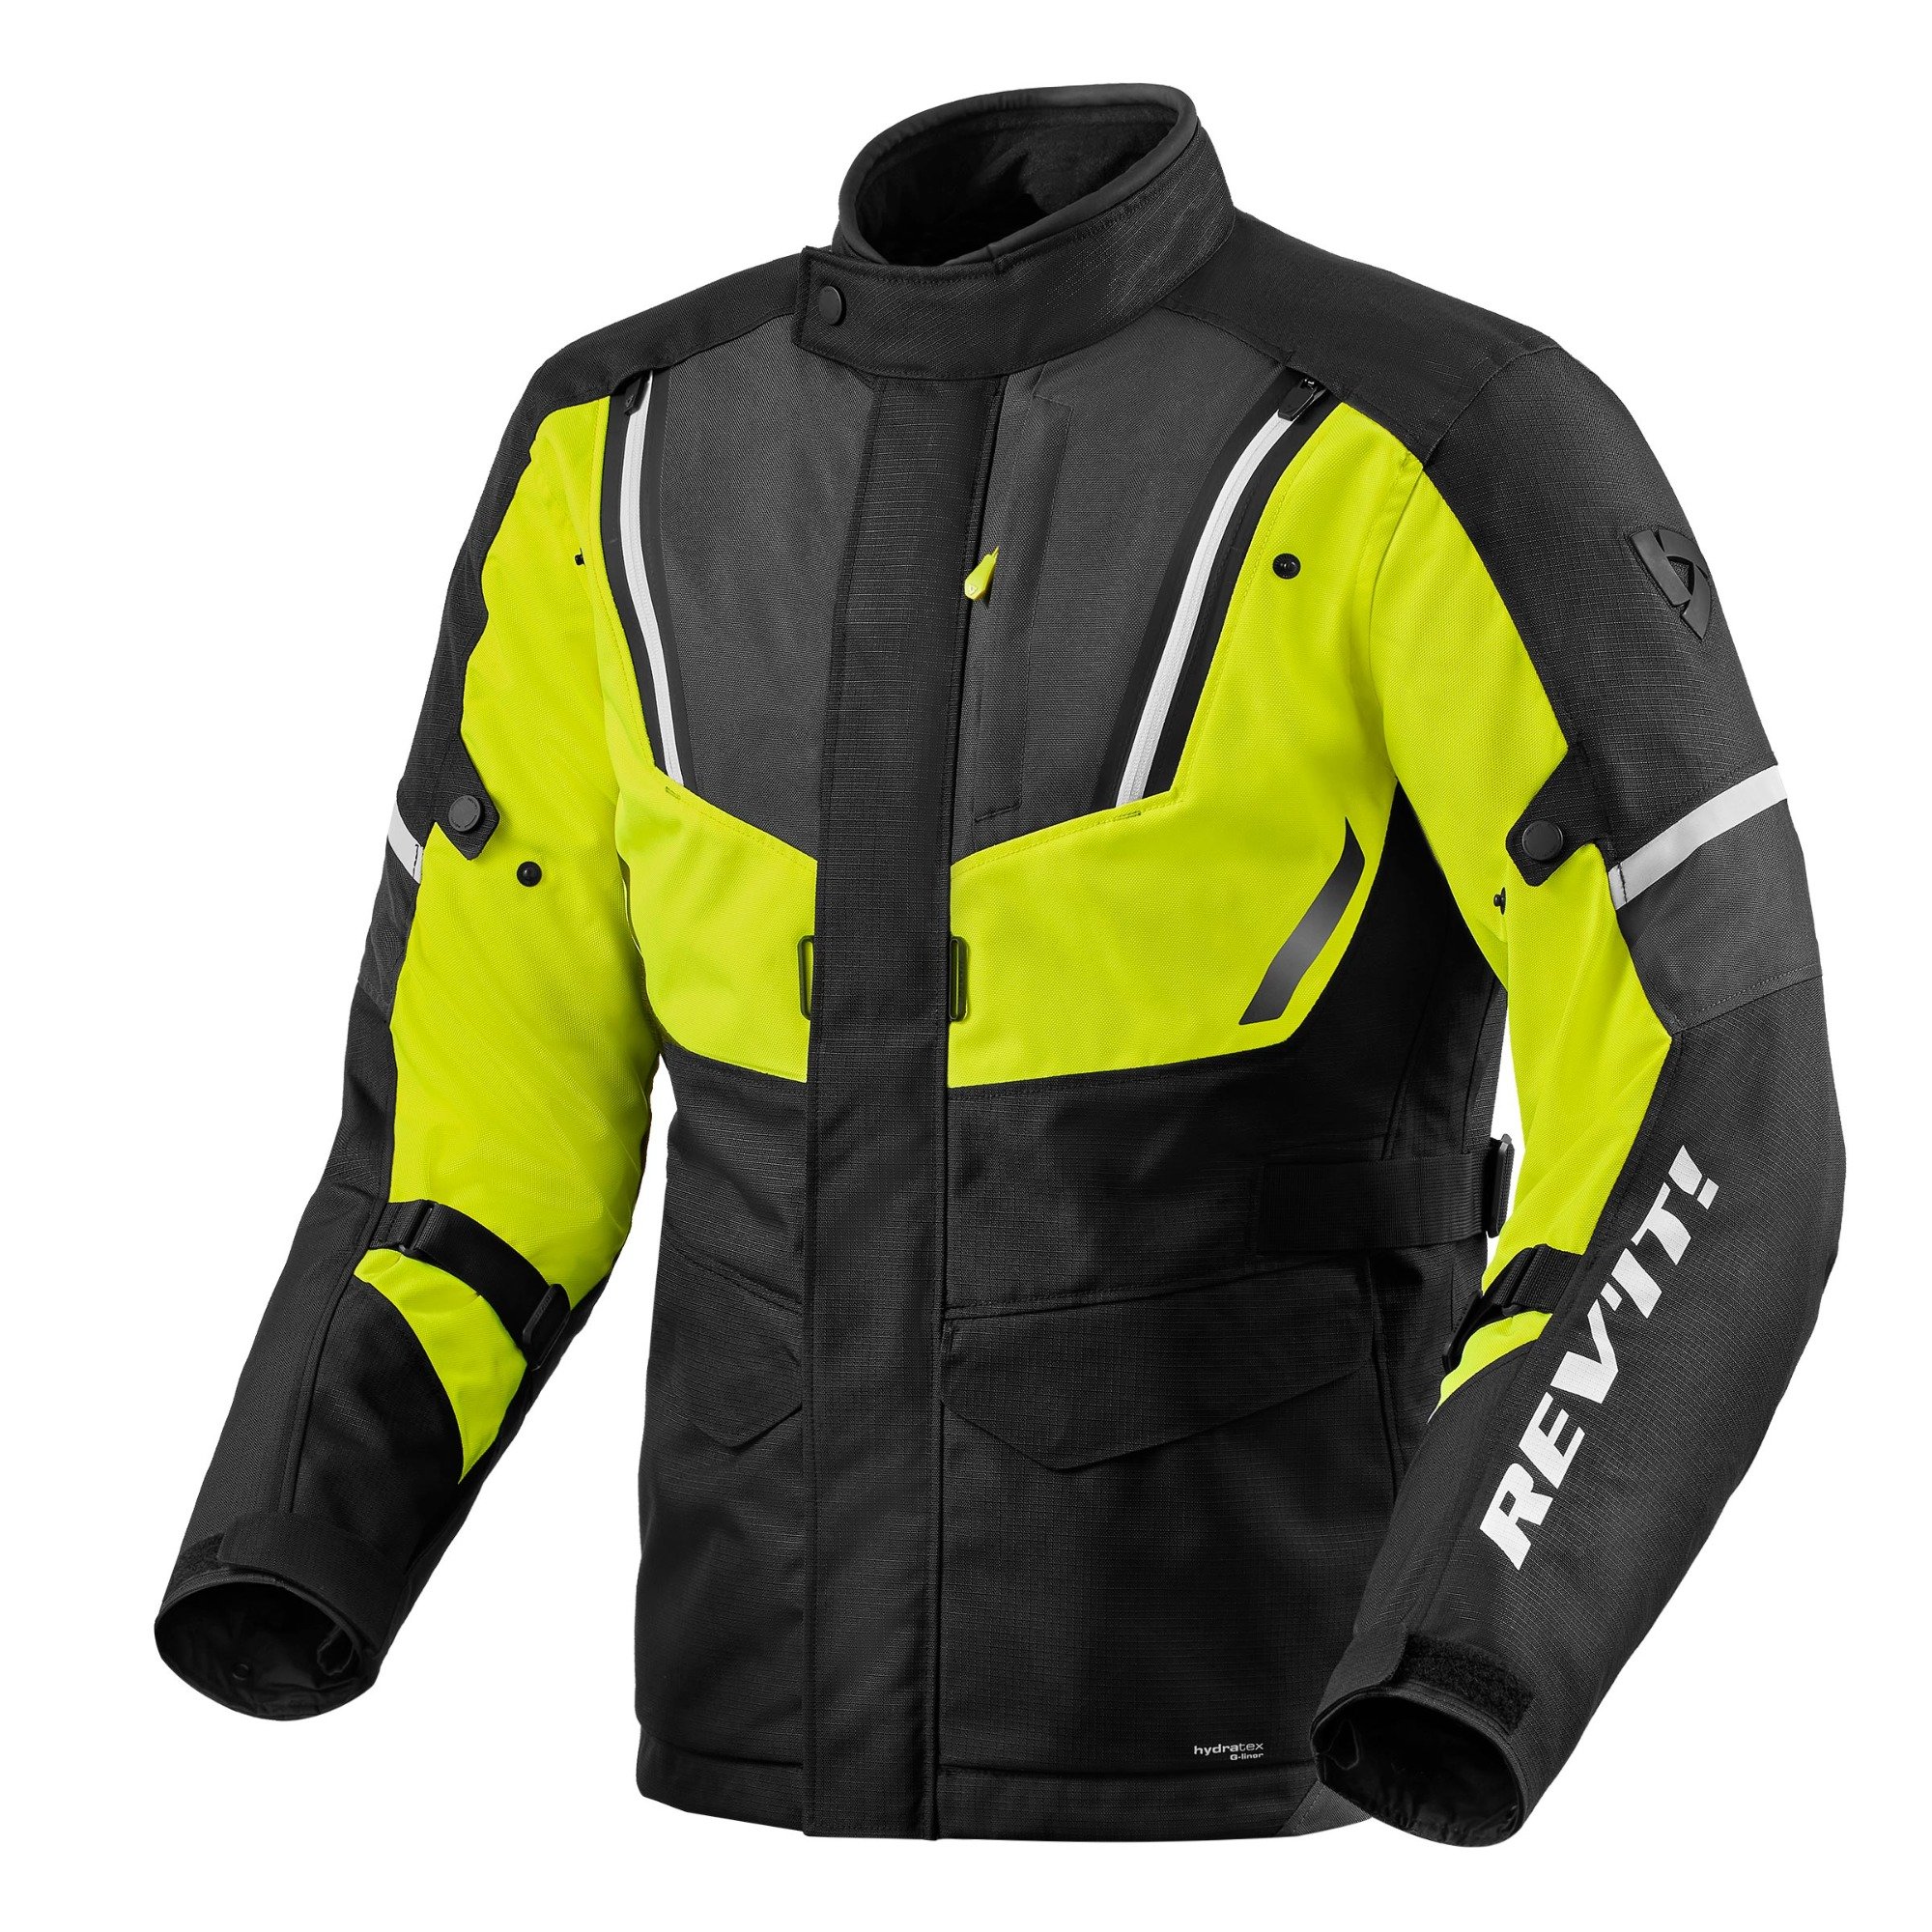 Image of REV'IT! Move H2O Jacket Black Neon Yellow Size M ID 8700001333054